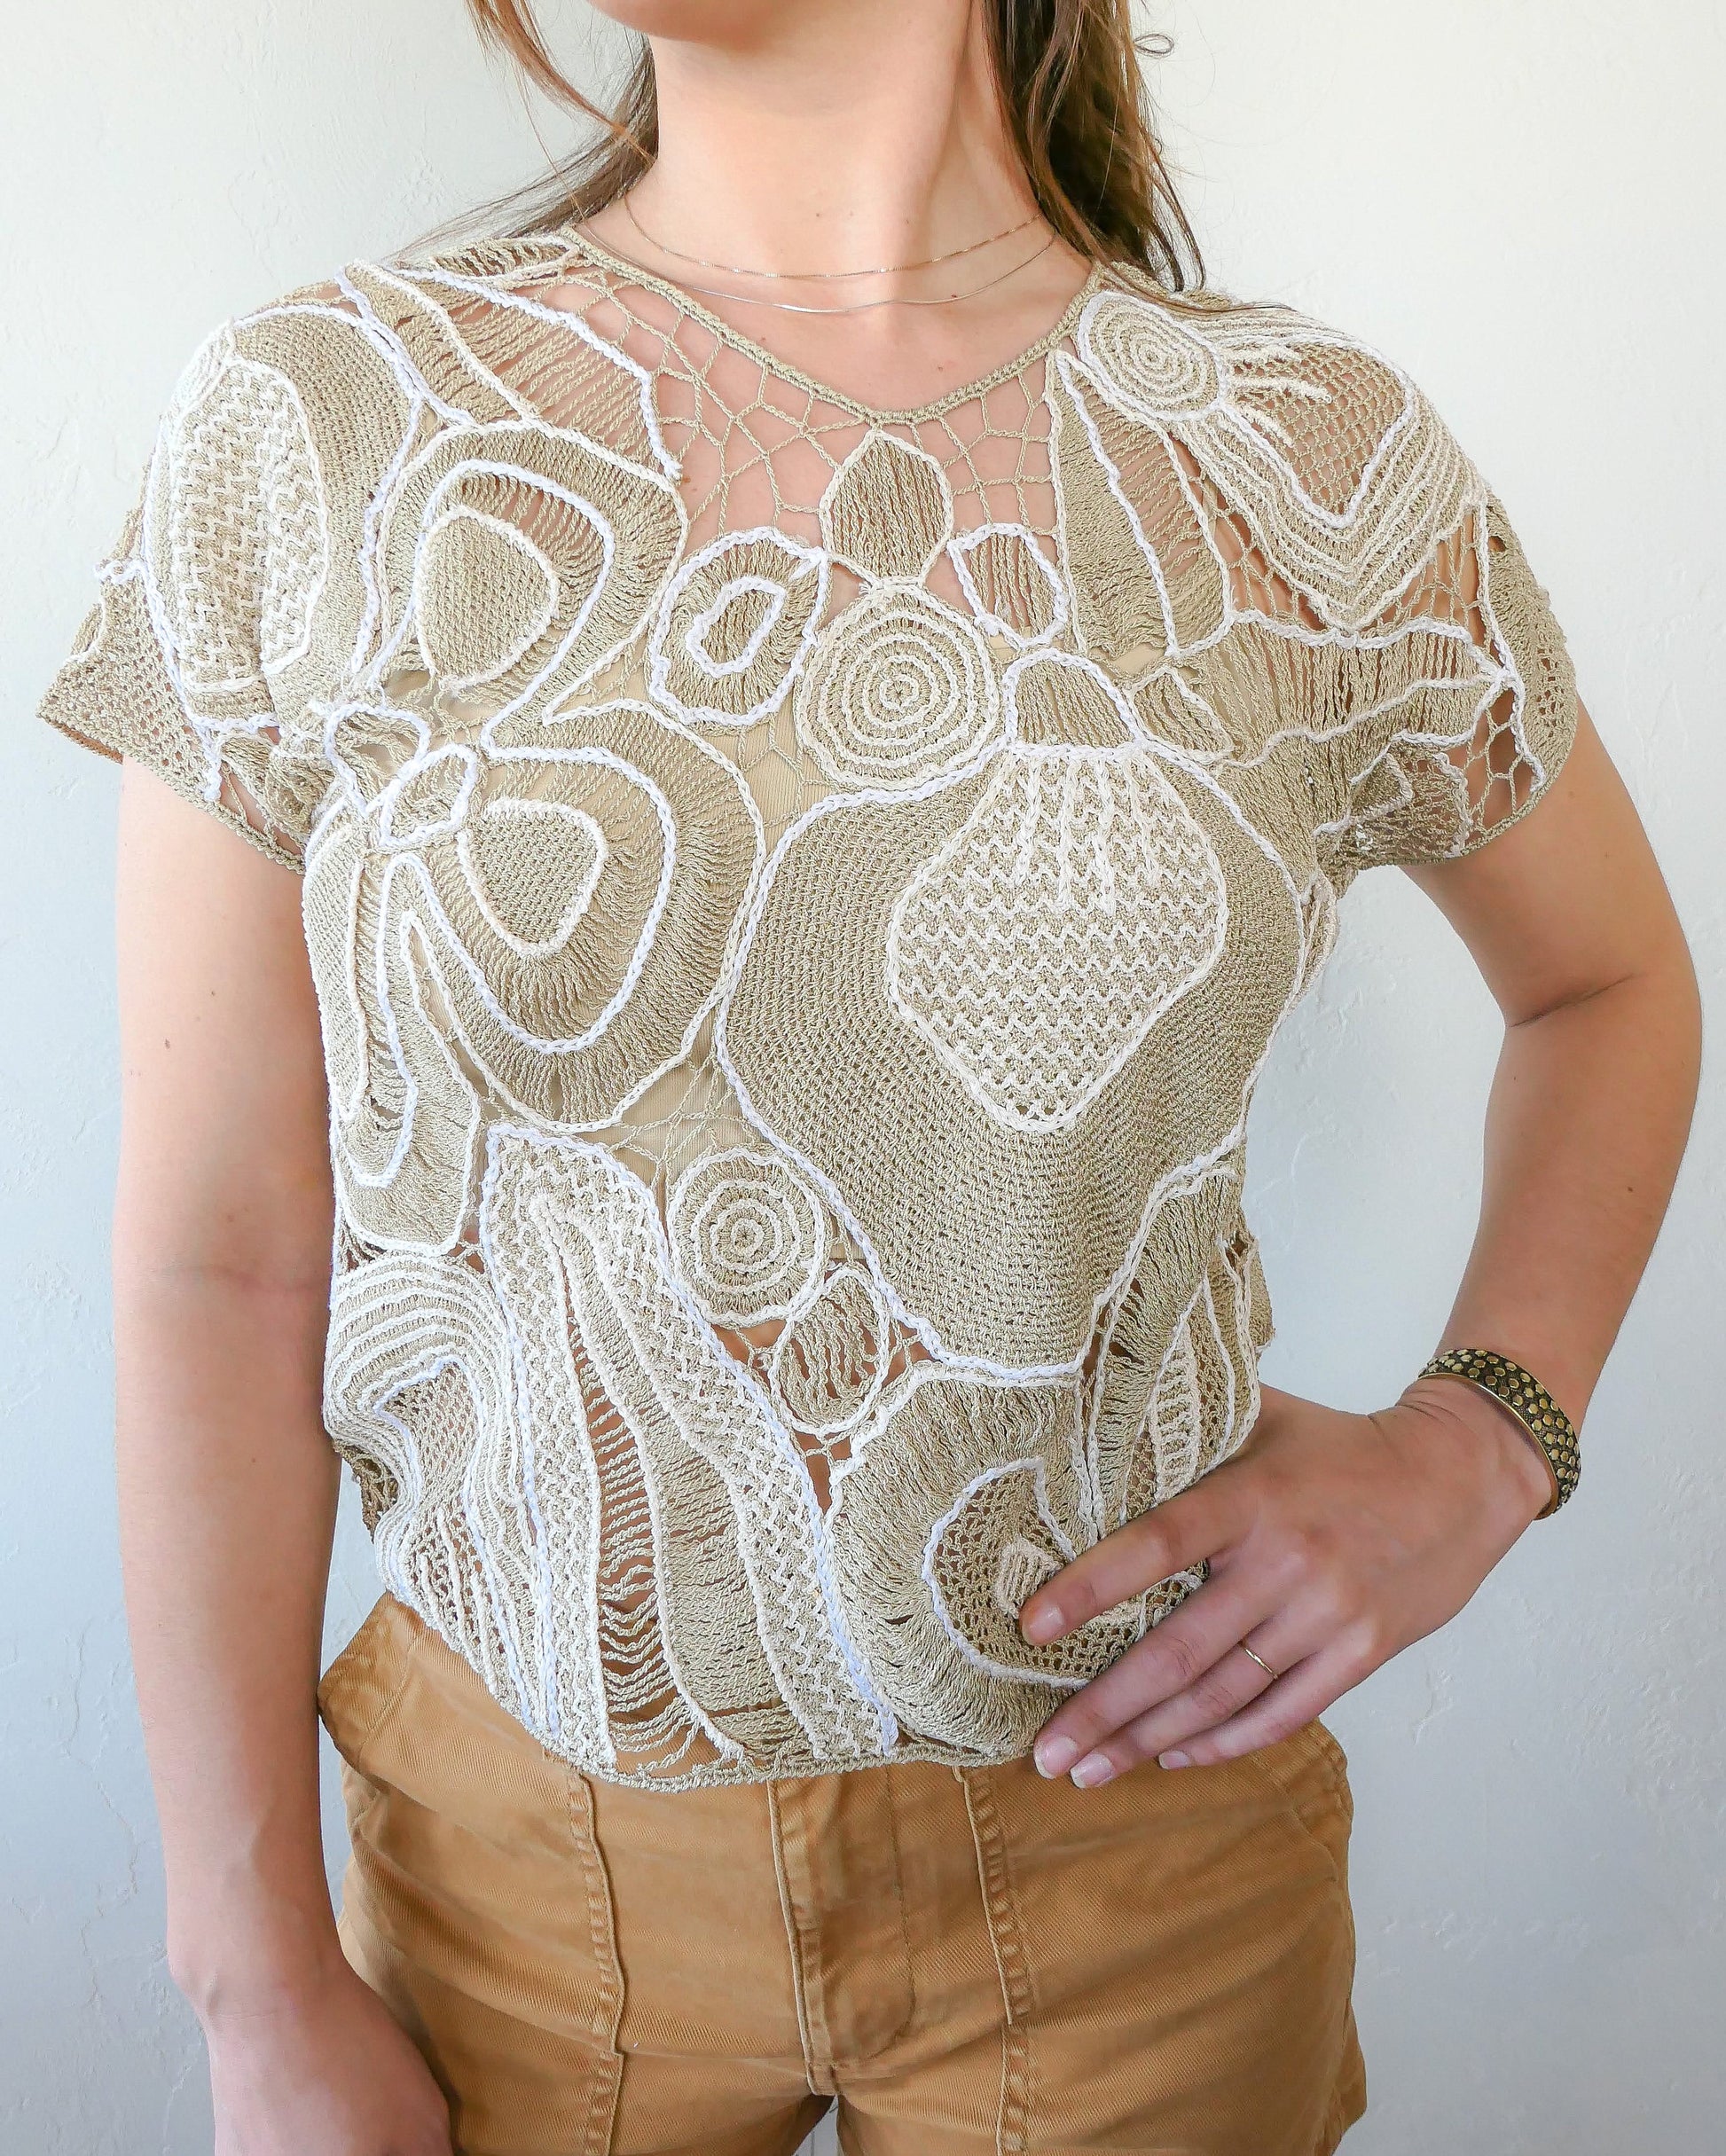 Refresh your wardrobe with this abstract floral patterned hand crocheted Lim's Vintage original high V-neck pullover top from the 1980s in neutral tones of taupe and white.  Pair it with jeans or shorts and sandals, or dress it up with a flowy skirt and wedges for a night out on a warm, summer's eve.